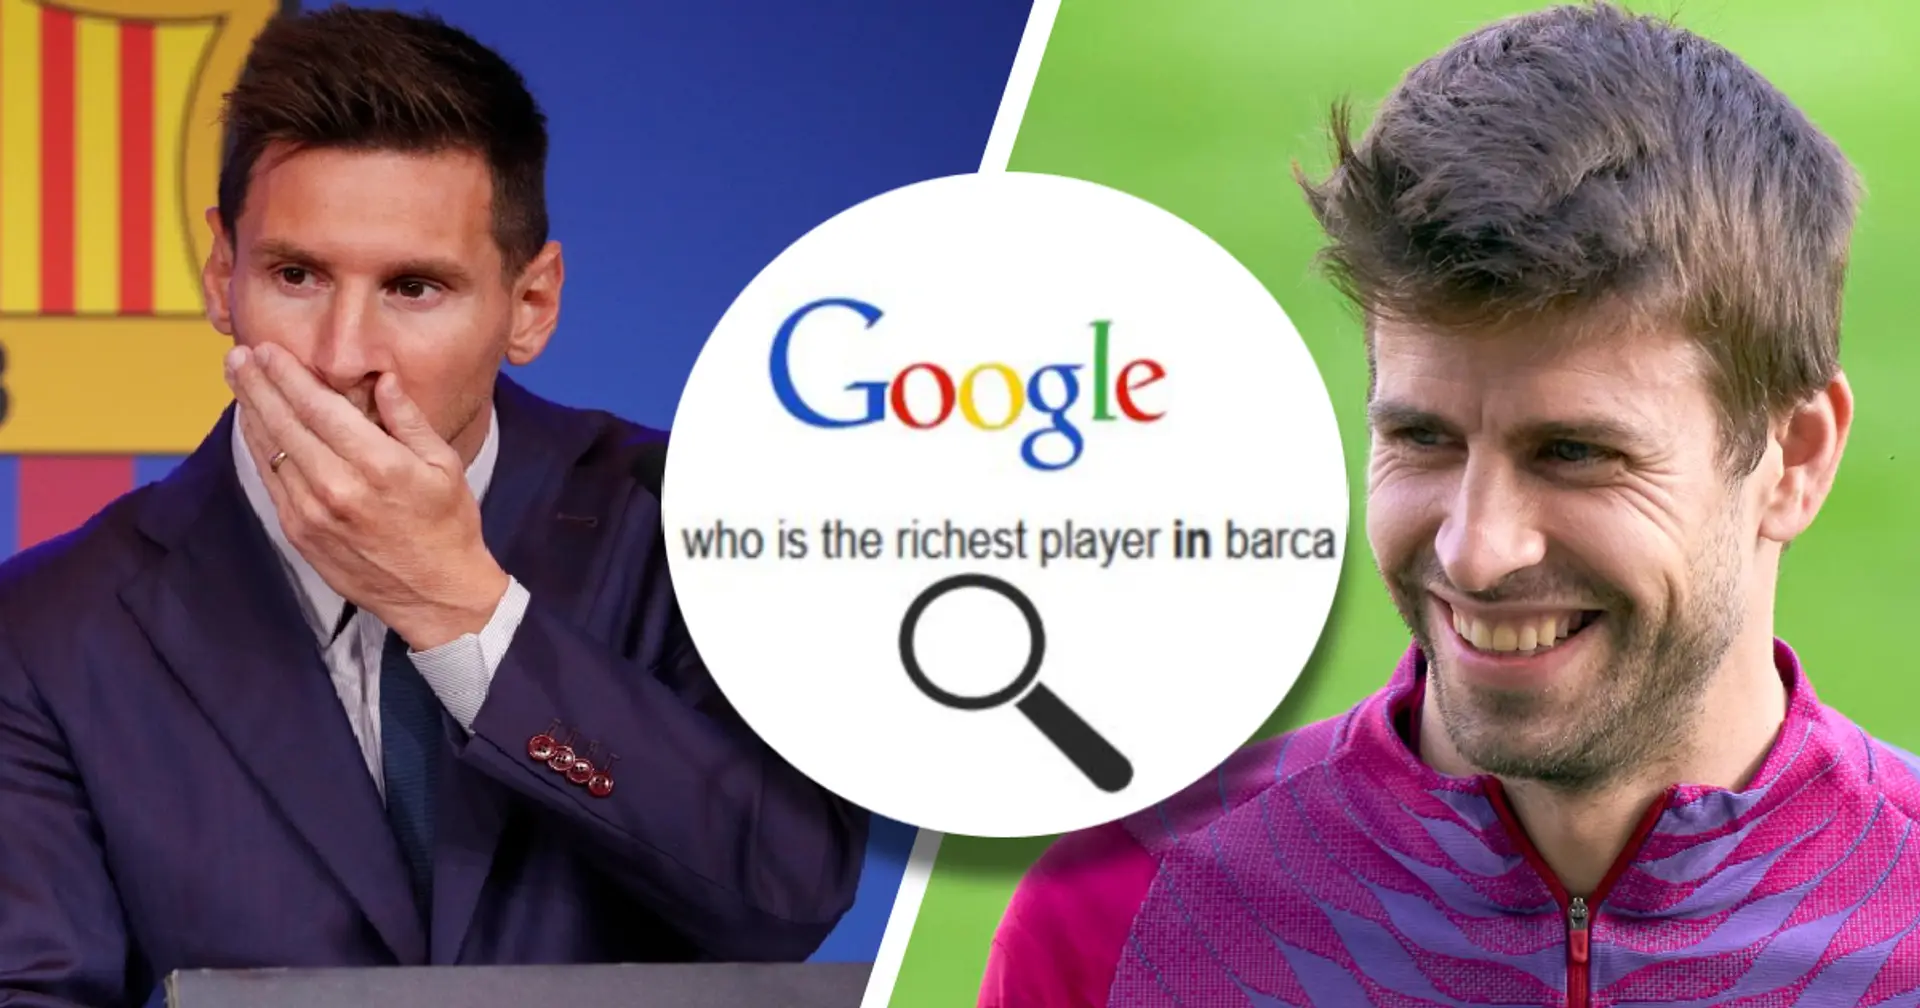 Who is the richest player at Barcelona? Googled, answered